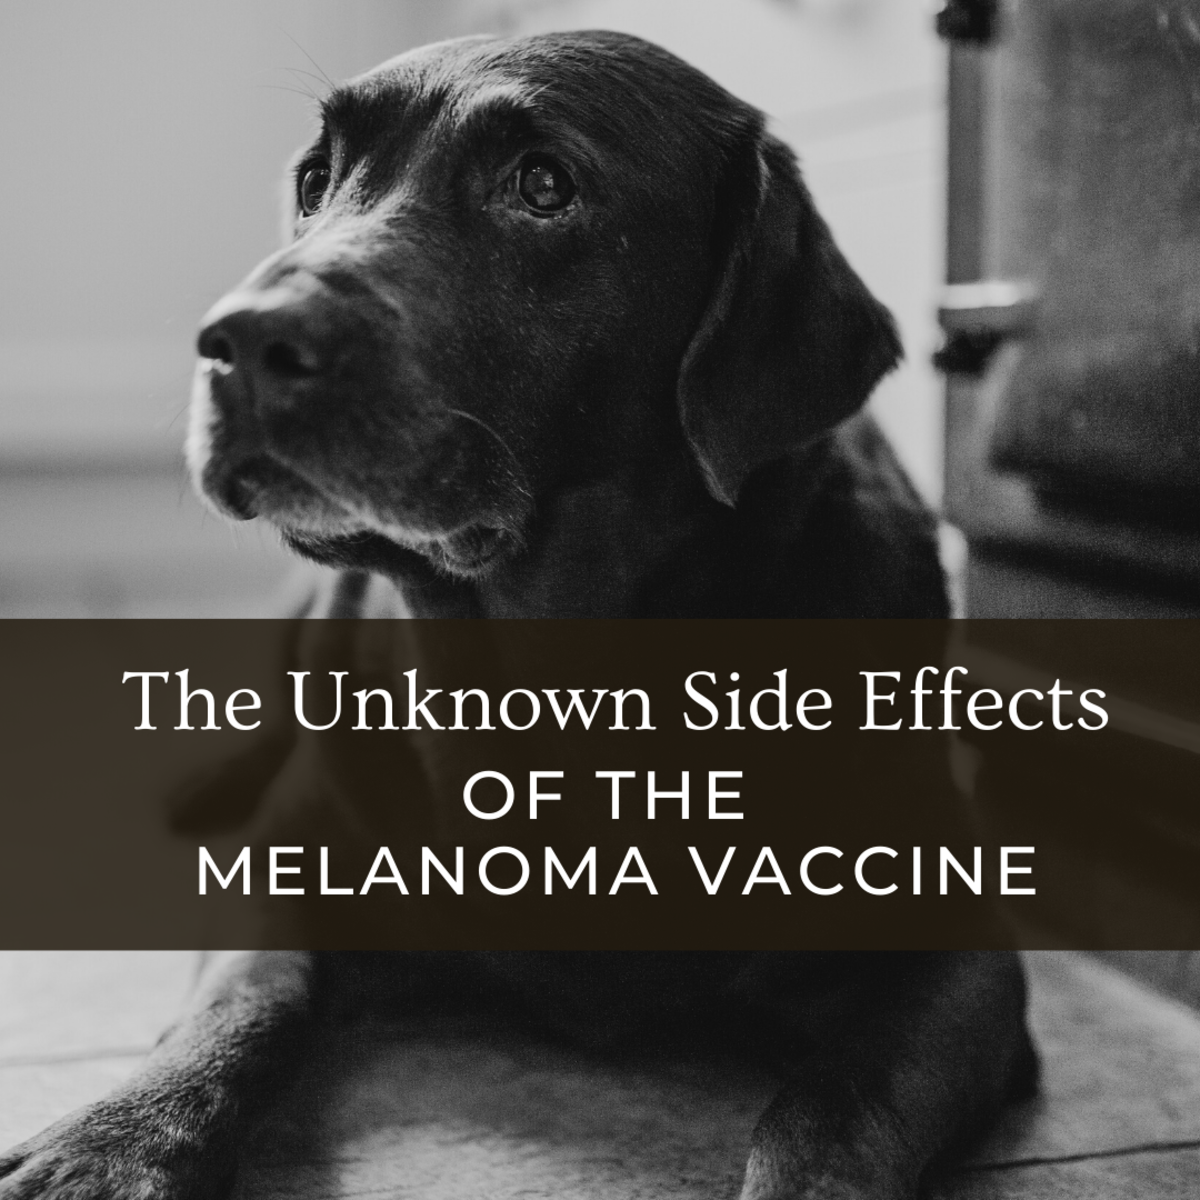 Possible Side Effects in the Melanoma Vaccine